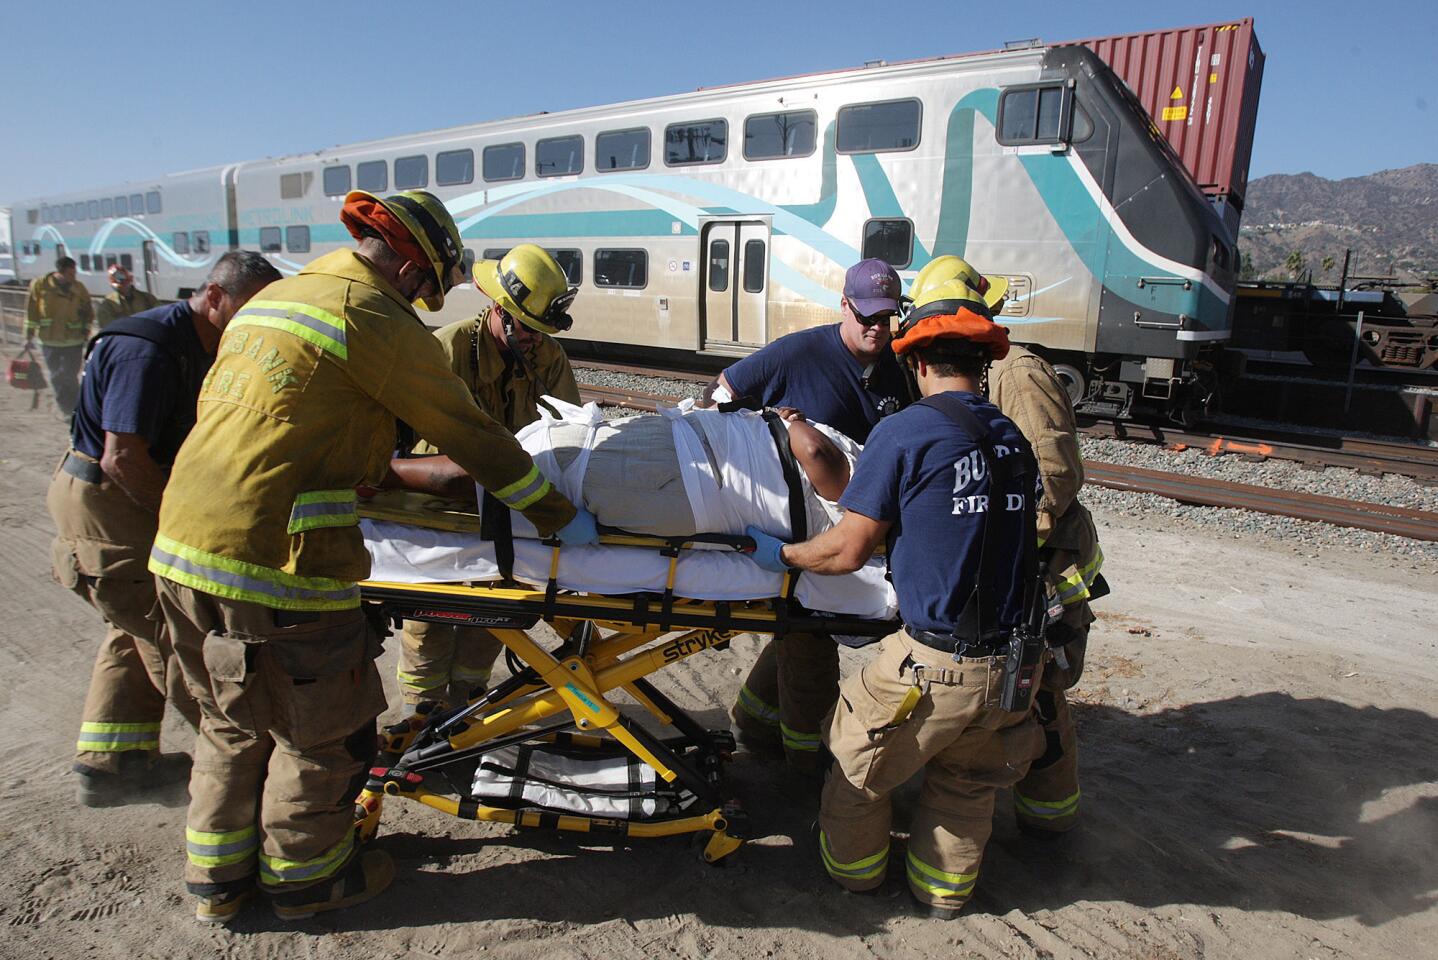 A fifth victim, of six, is taken by gurney to an awaiting ambulance from a southbound MetroLink commuter train after hitting a motorist at the intersection of San Fernando and Buena Vista in Burbank on Monday, September 2, 2014. There was one driver taken to the hospital in critical condition.